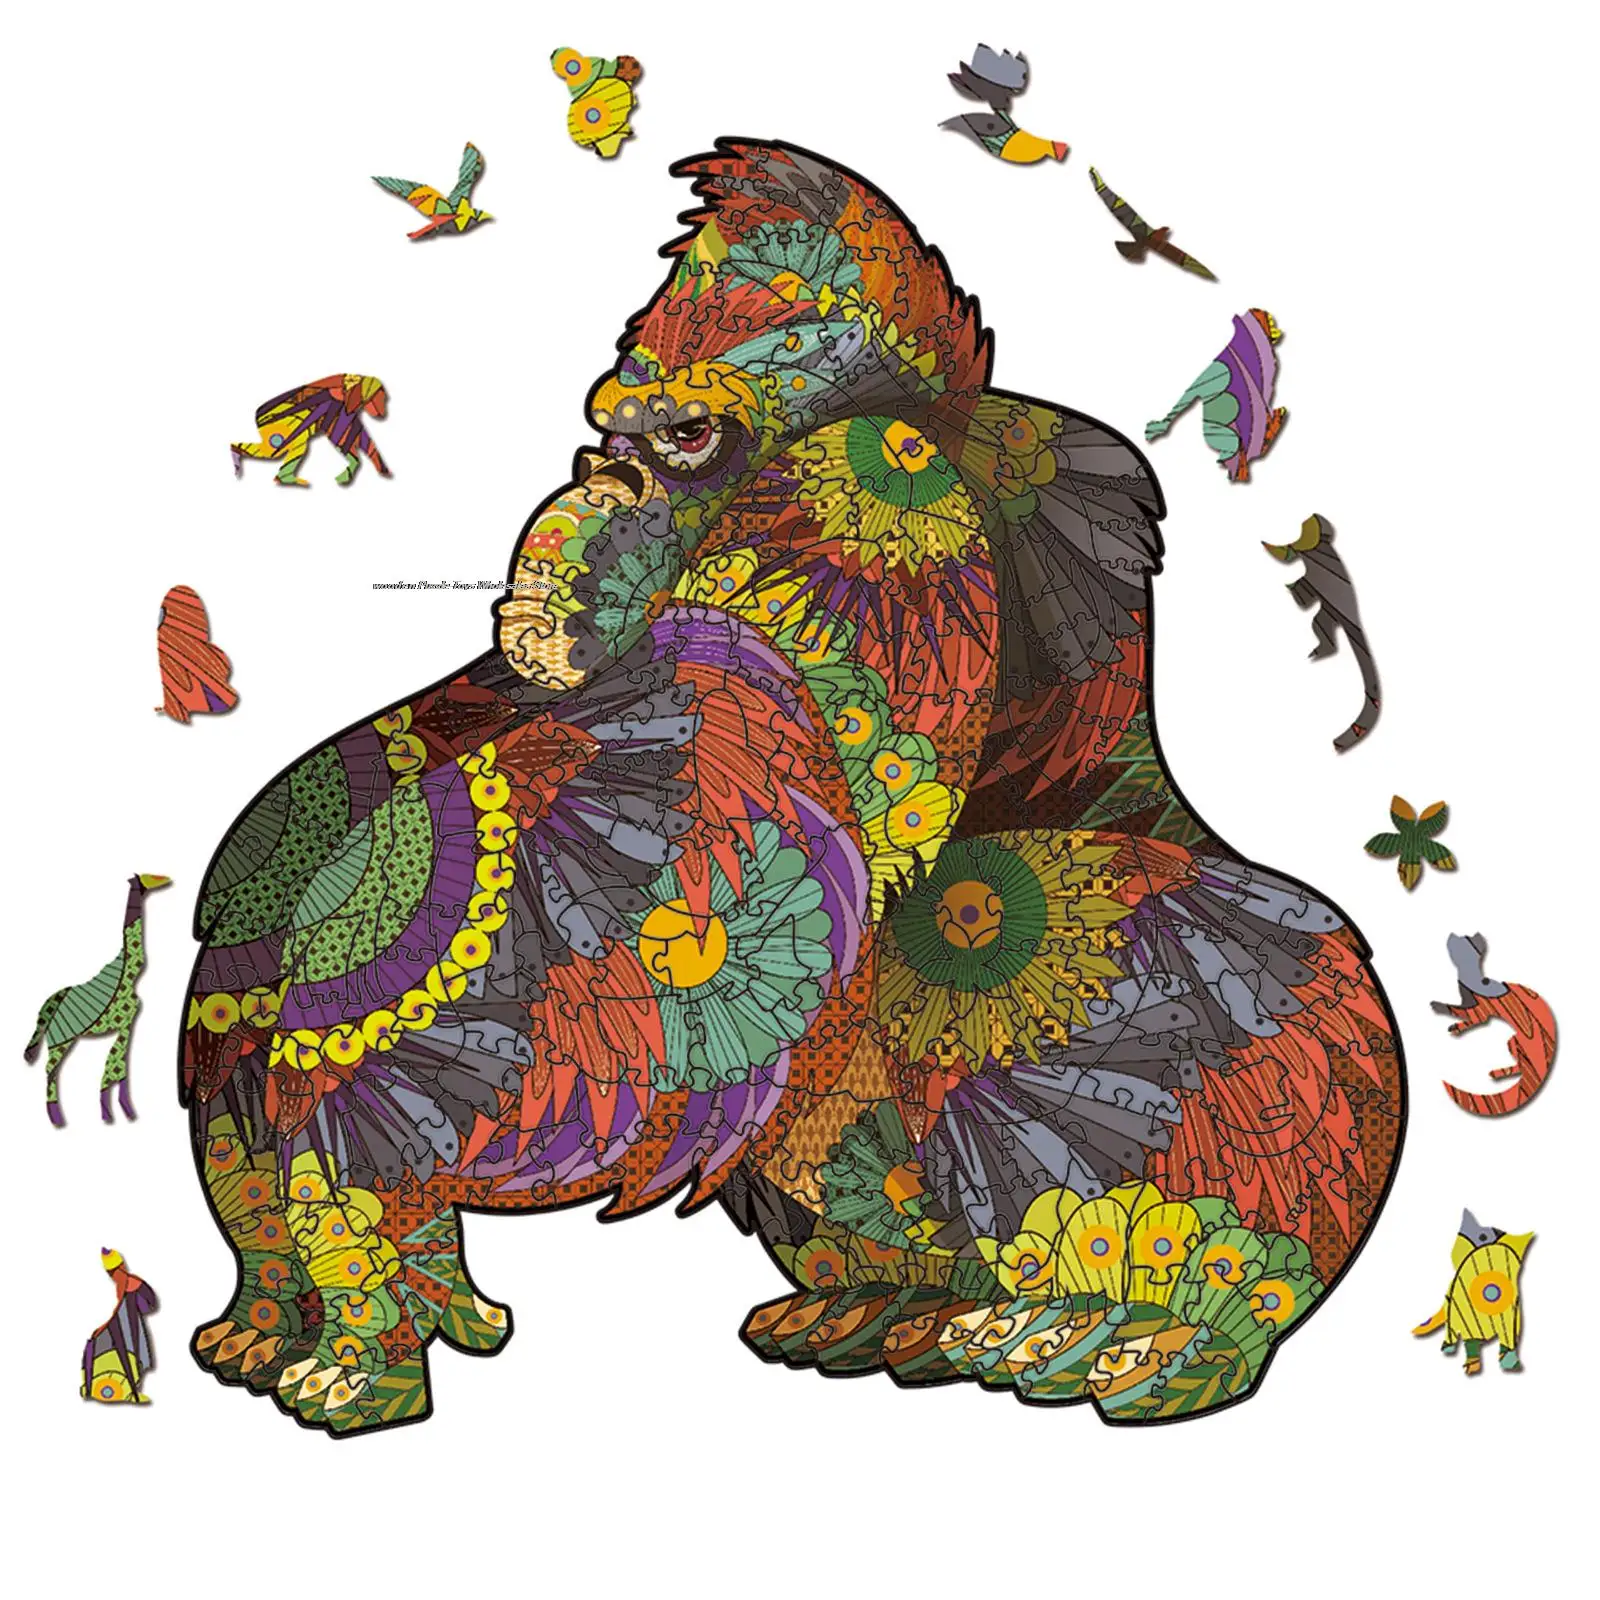 

Colorful Wooden Jigsaw Puzzle Gorilla Kids Puzzles Toys Wooden Animals Puzzle For Adults Children Educational Toys Gifts Collect